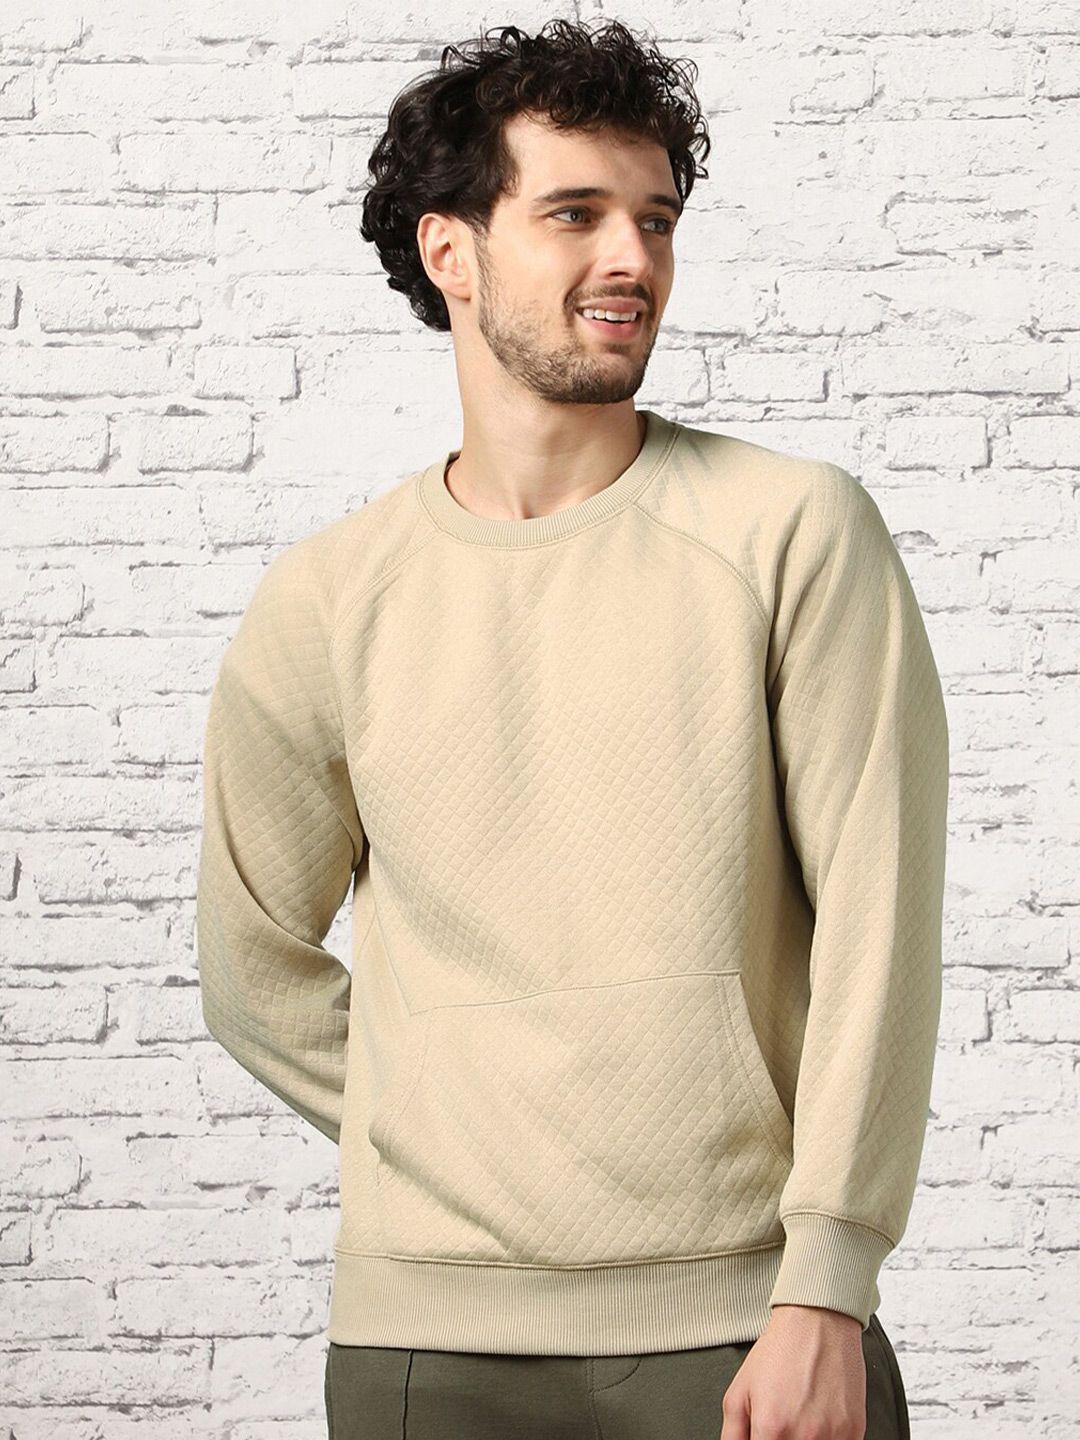 nobero checked self design quilted pullover